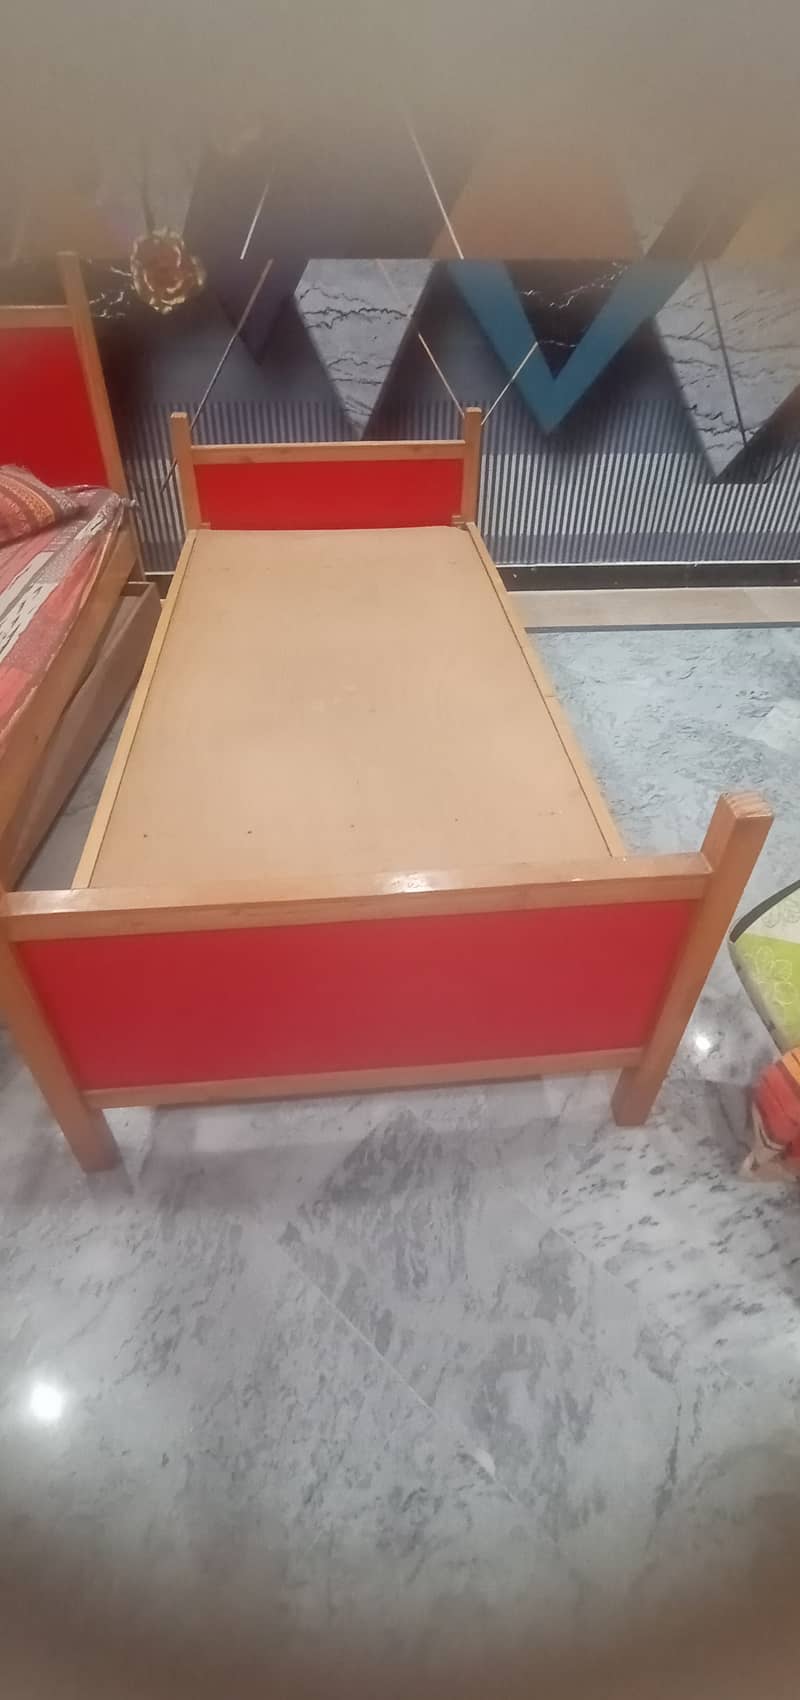 Bunker bed with mattress for sale 5